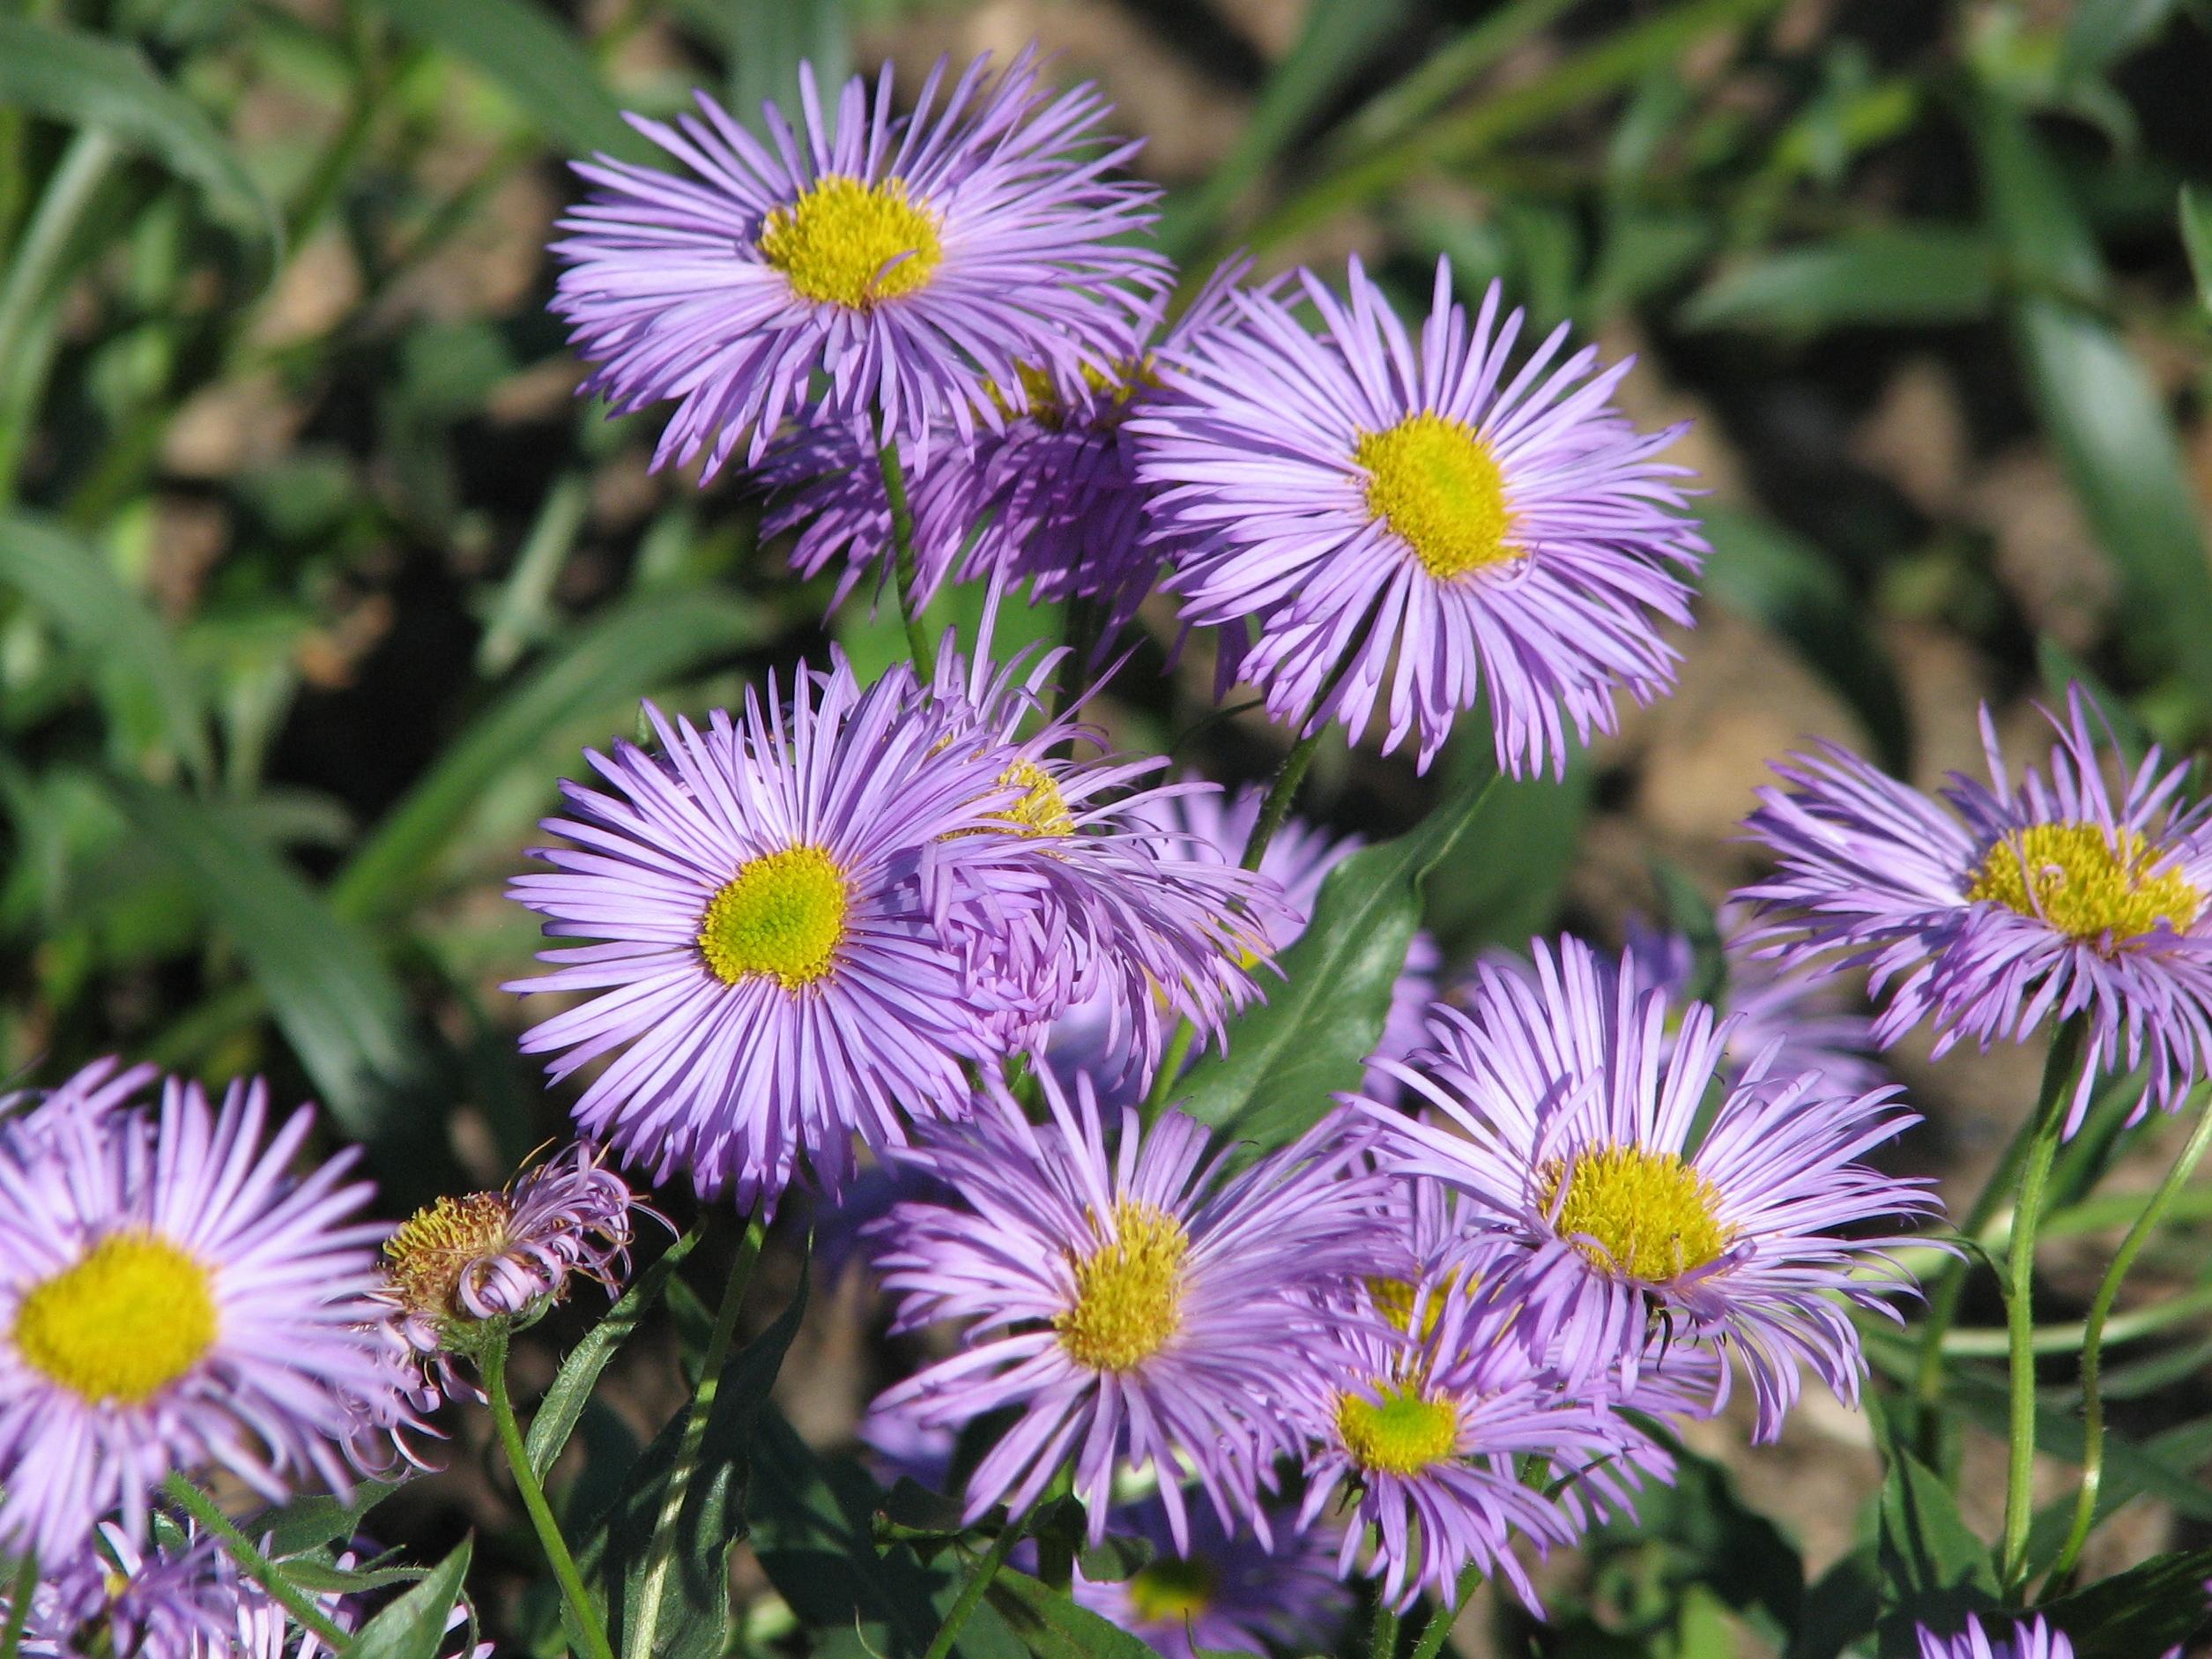 light-purple flowers with yellow-lime center, green leaves and stems 